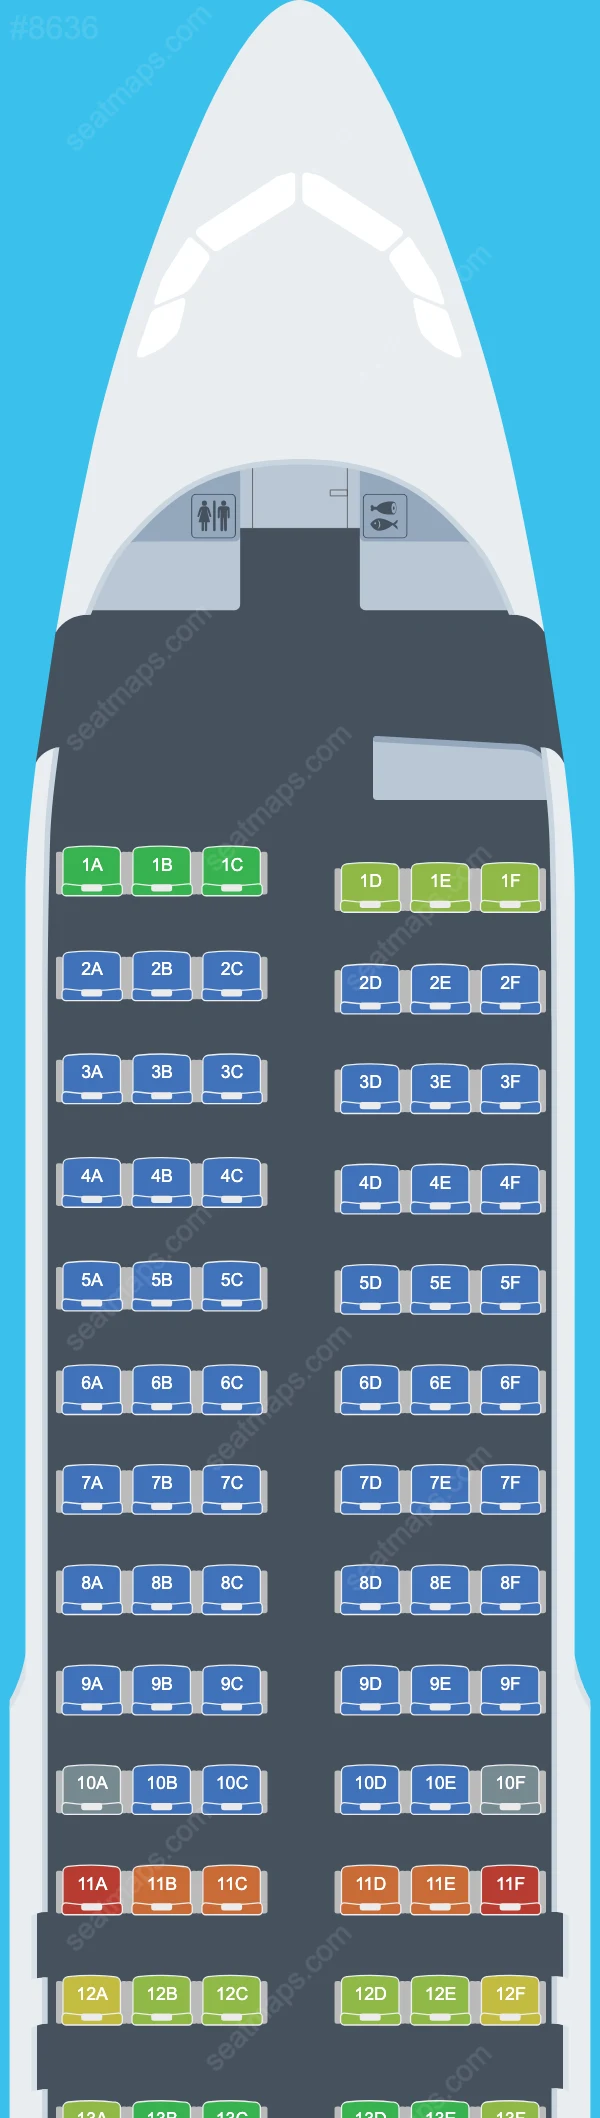 Network Aviation Airbus A320 Seat Maps A320-200